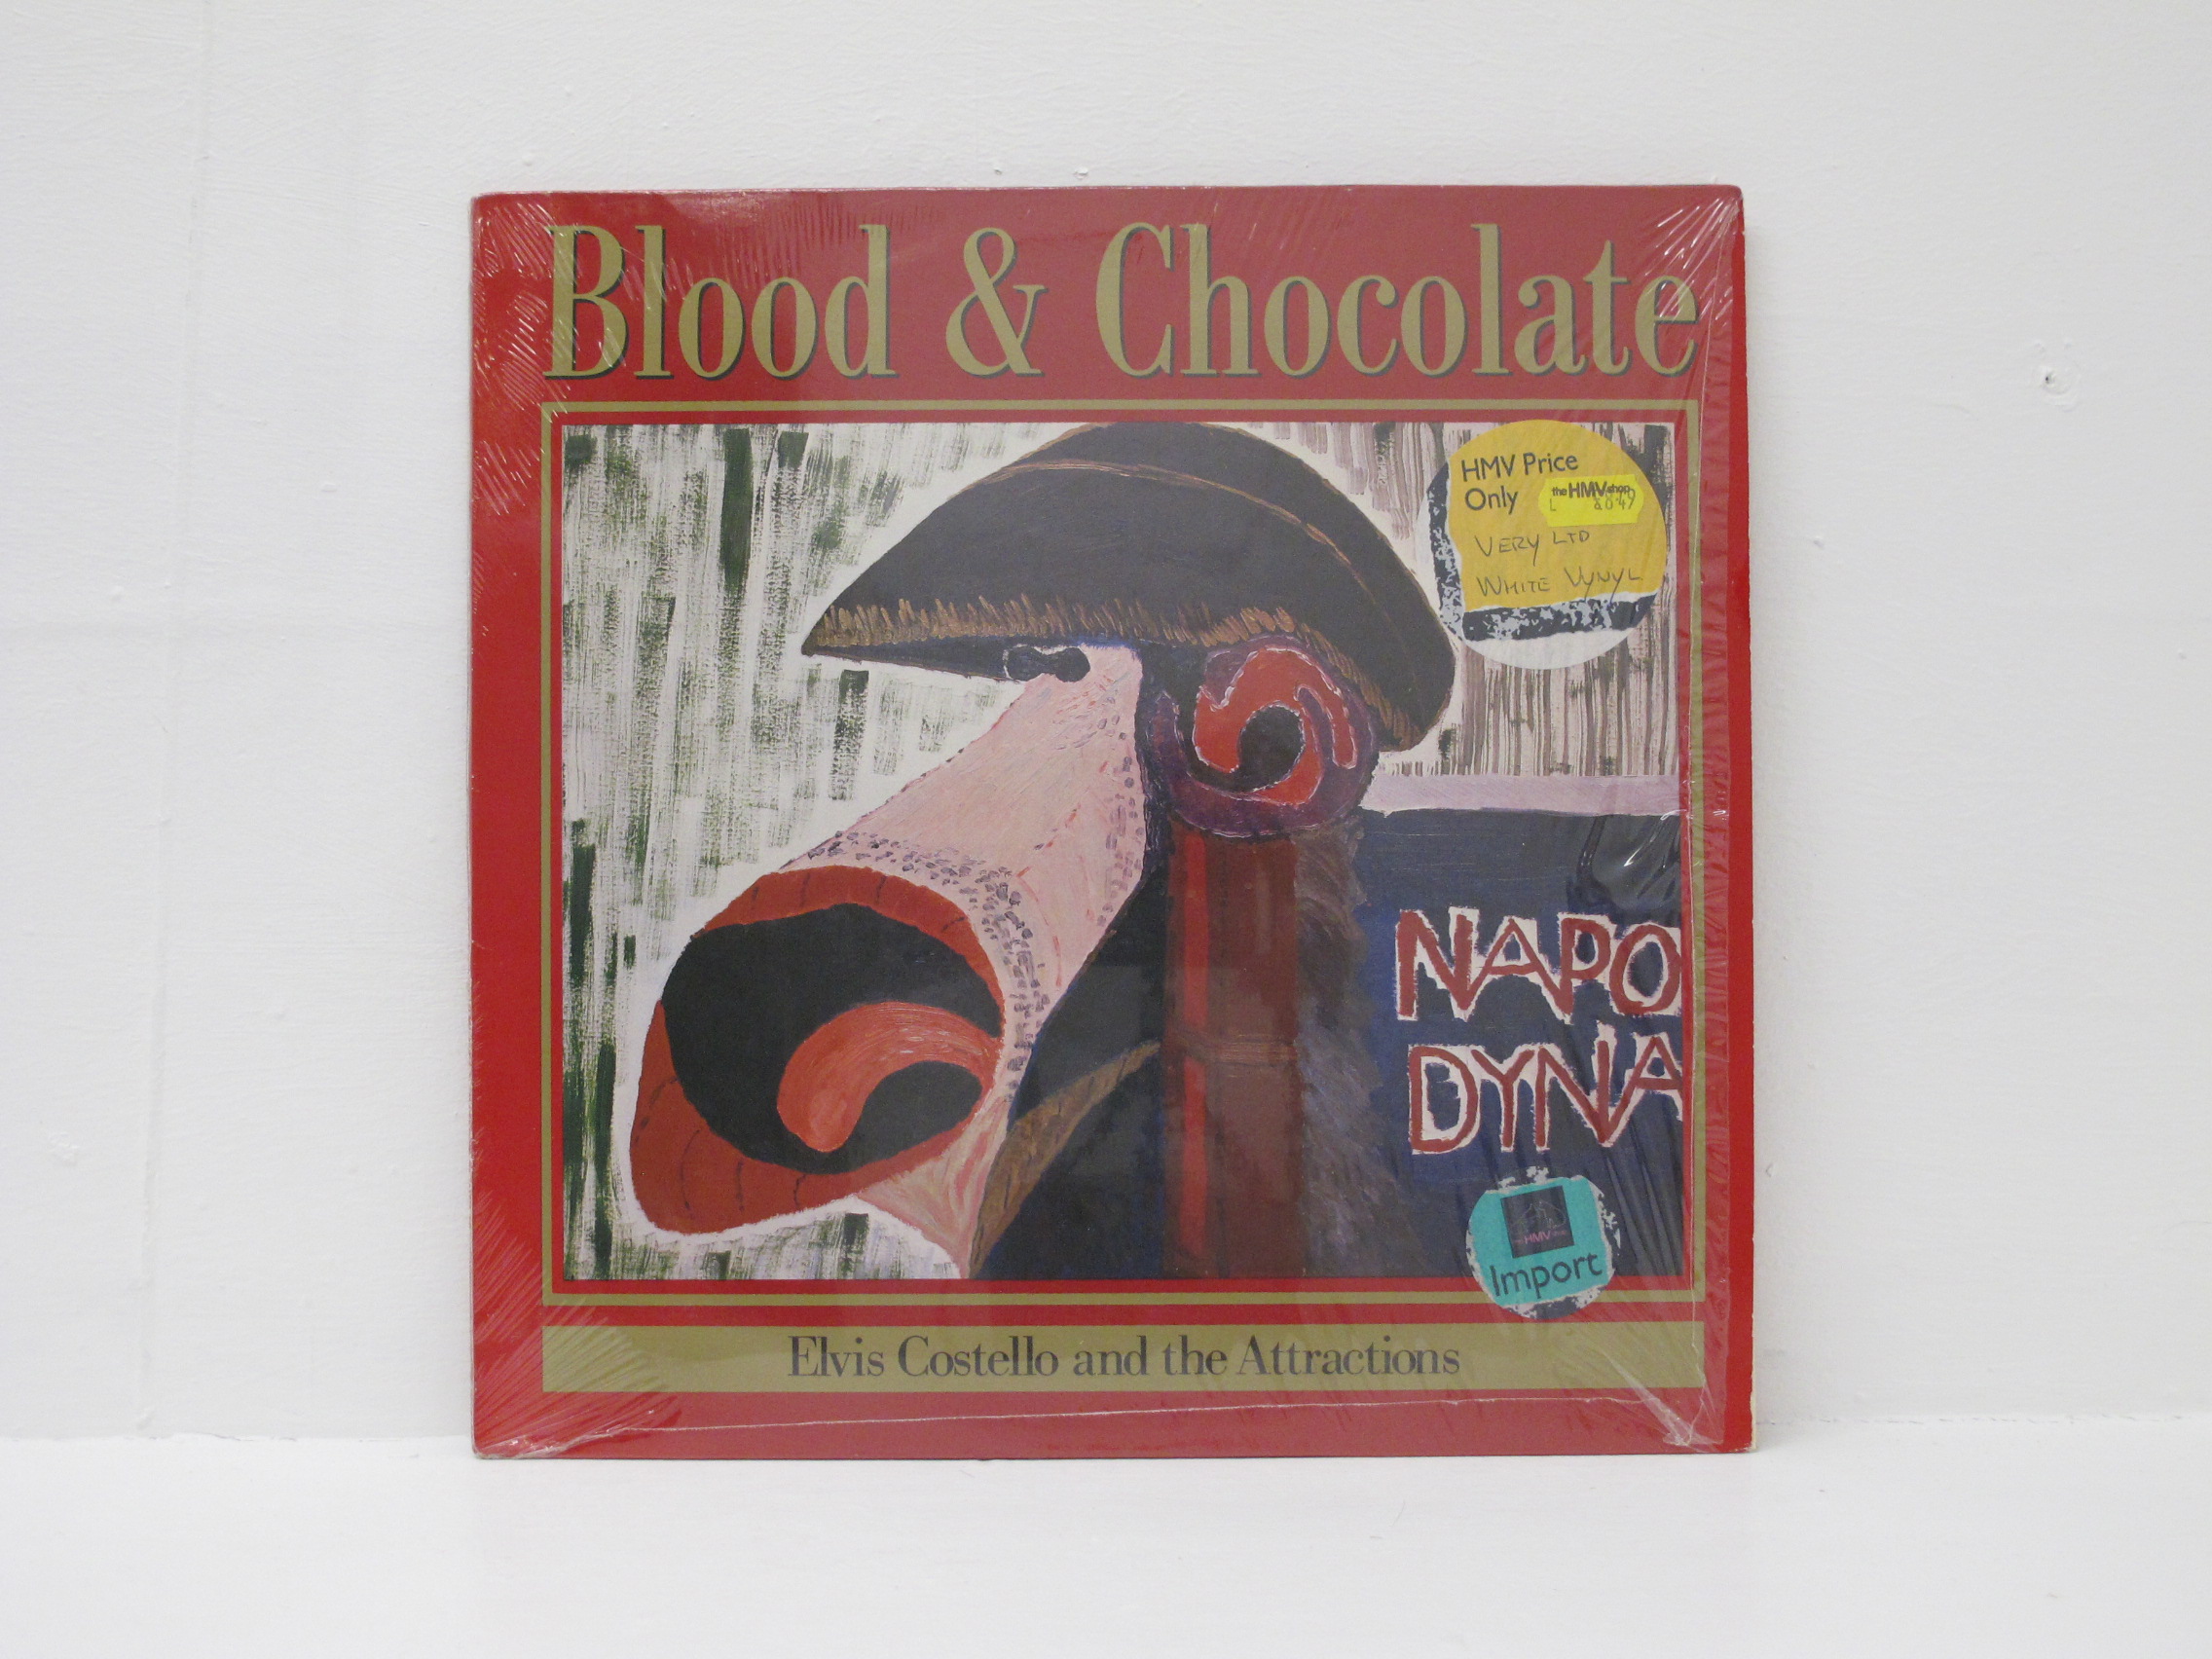 Elvis Costello and the Attractions - Blood & Chocolate